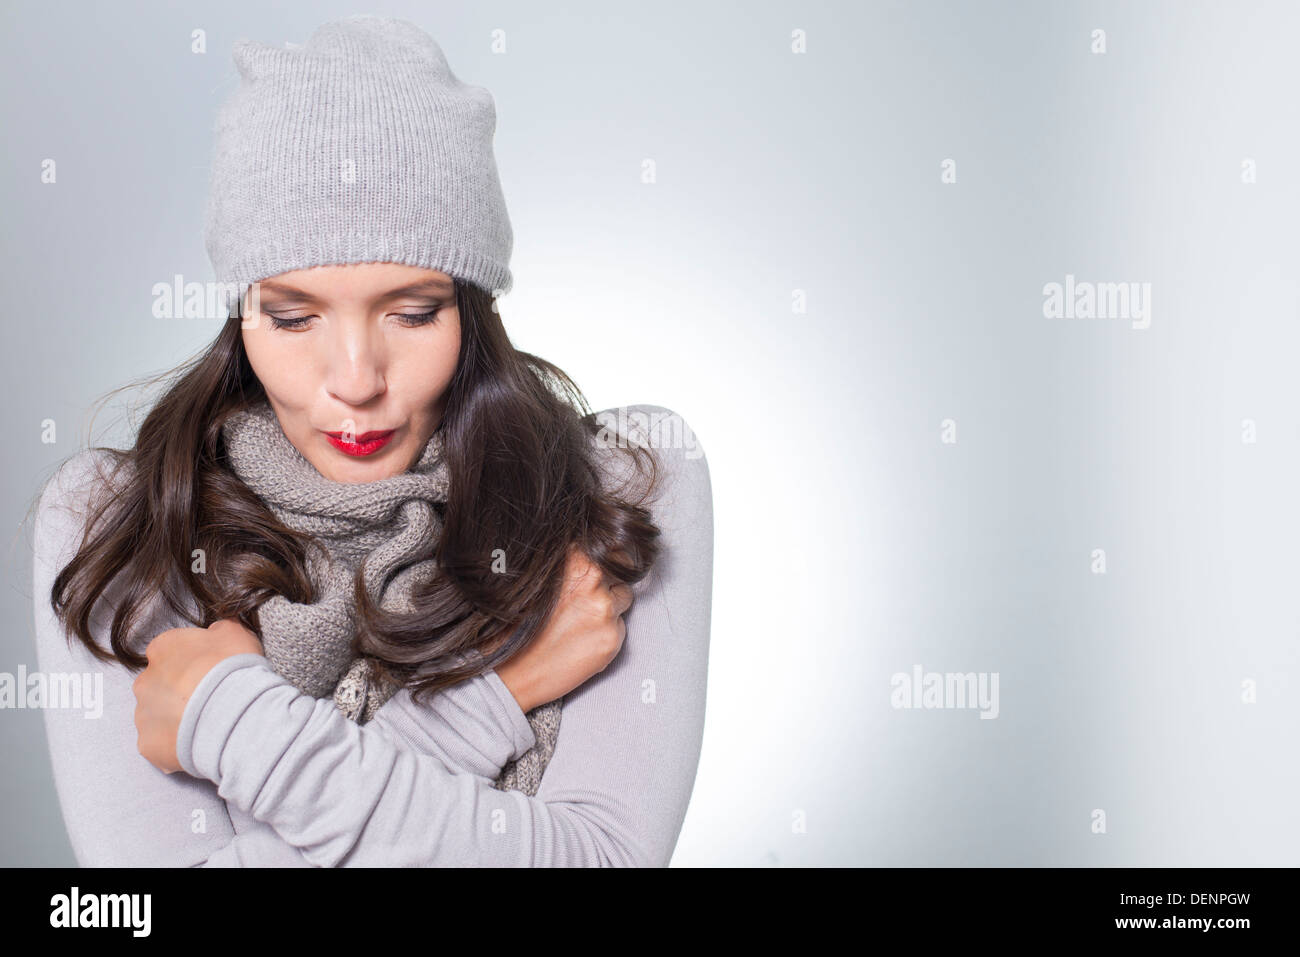 Pretty young woman in winter fashion cuddling down inside her gray woolly knitted jersey, scarf and cap on a cold day Stock Photo